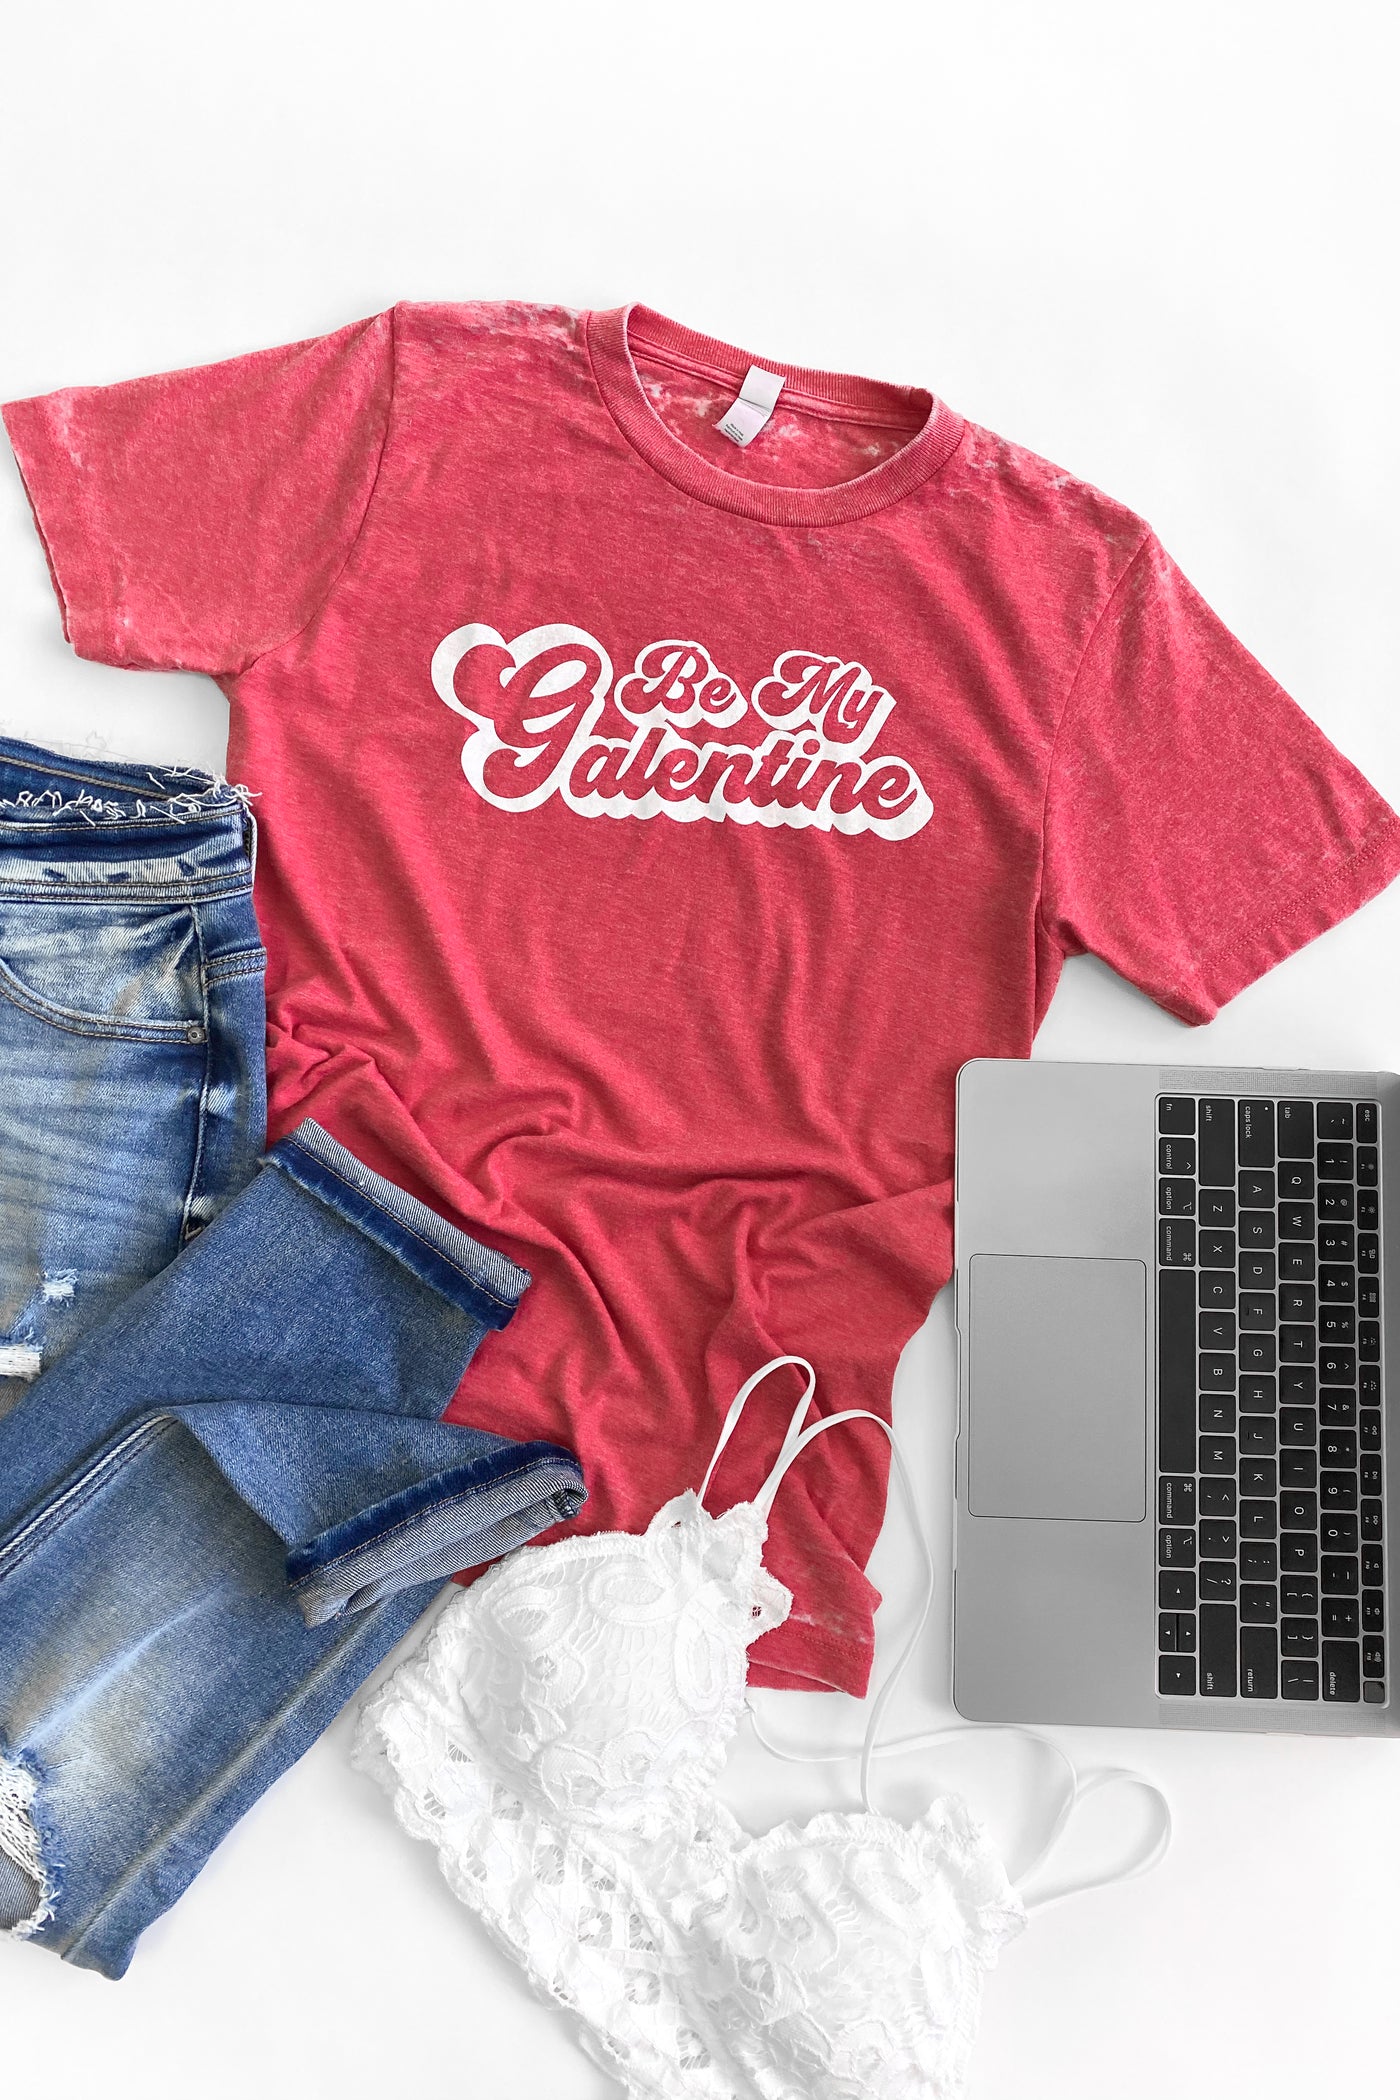 "Galentine" Graphic Tee Red Distressed Wash